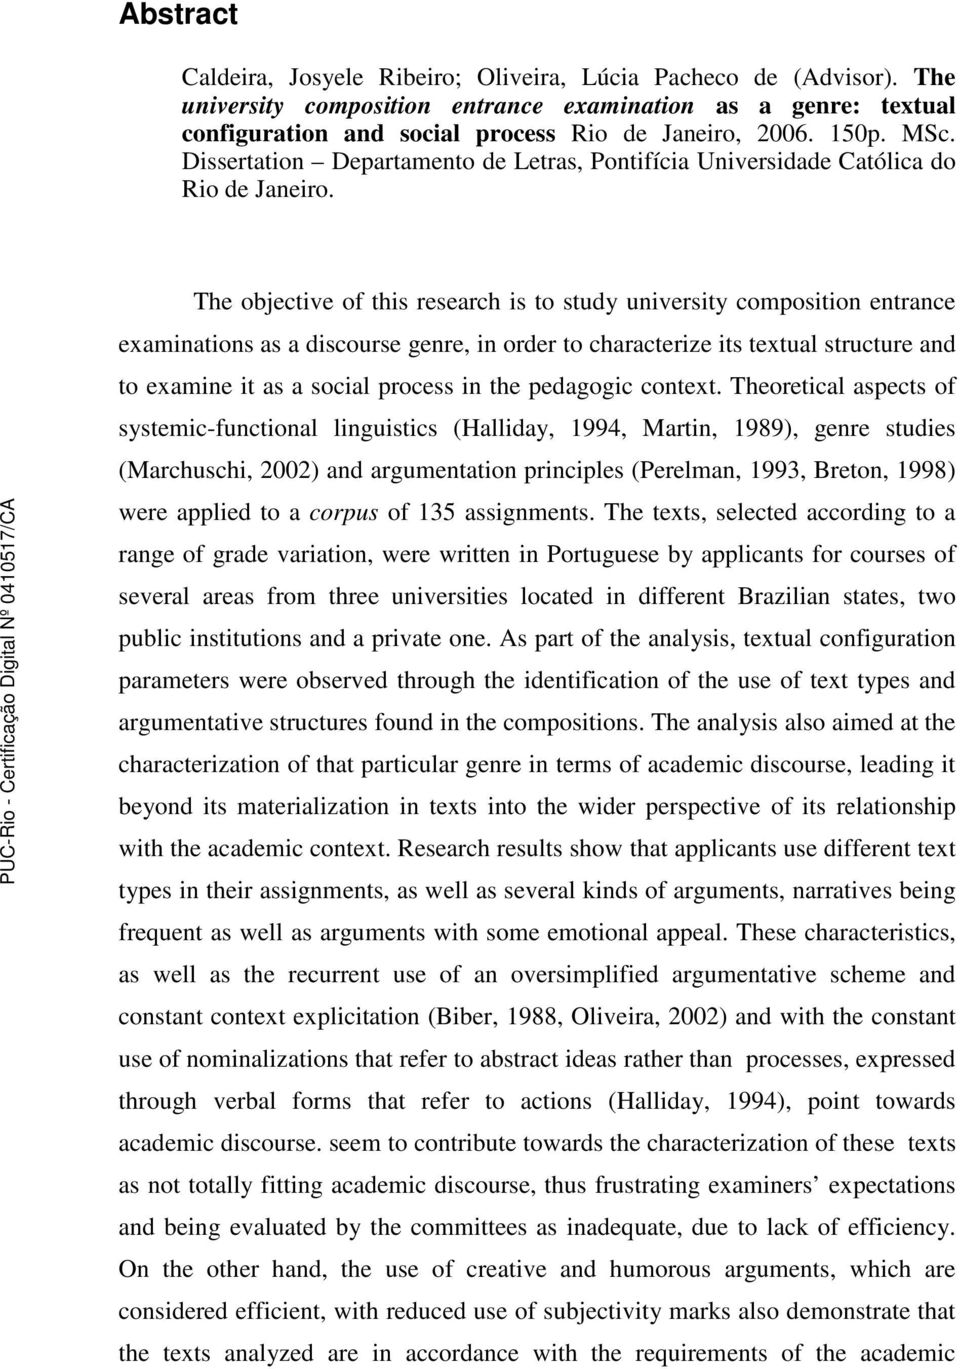 The objective of this research is to study university composition entrance examinations as a discourse genre, in order to characterize its textual structure and to examine it as a social process in